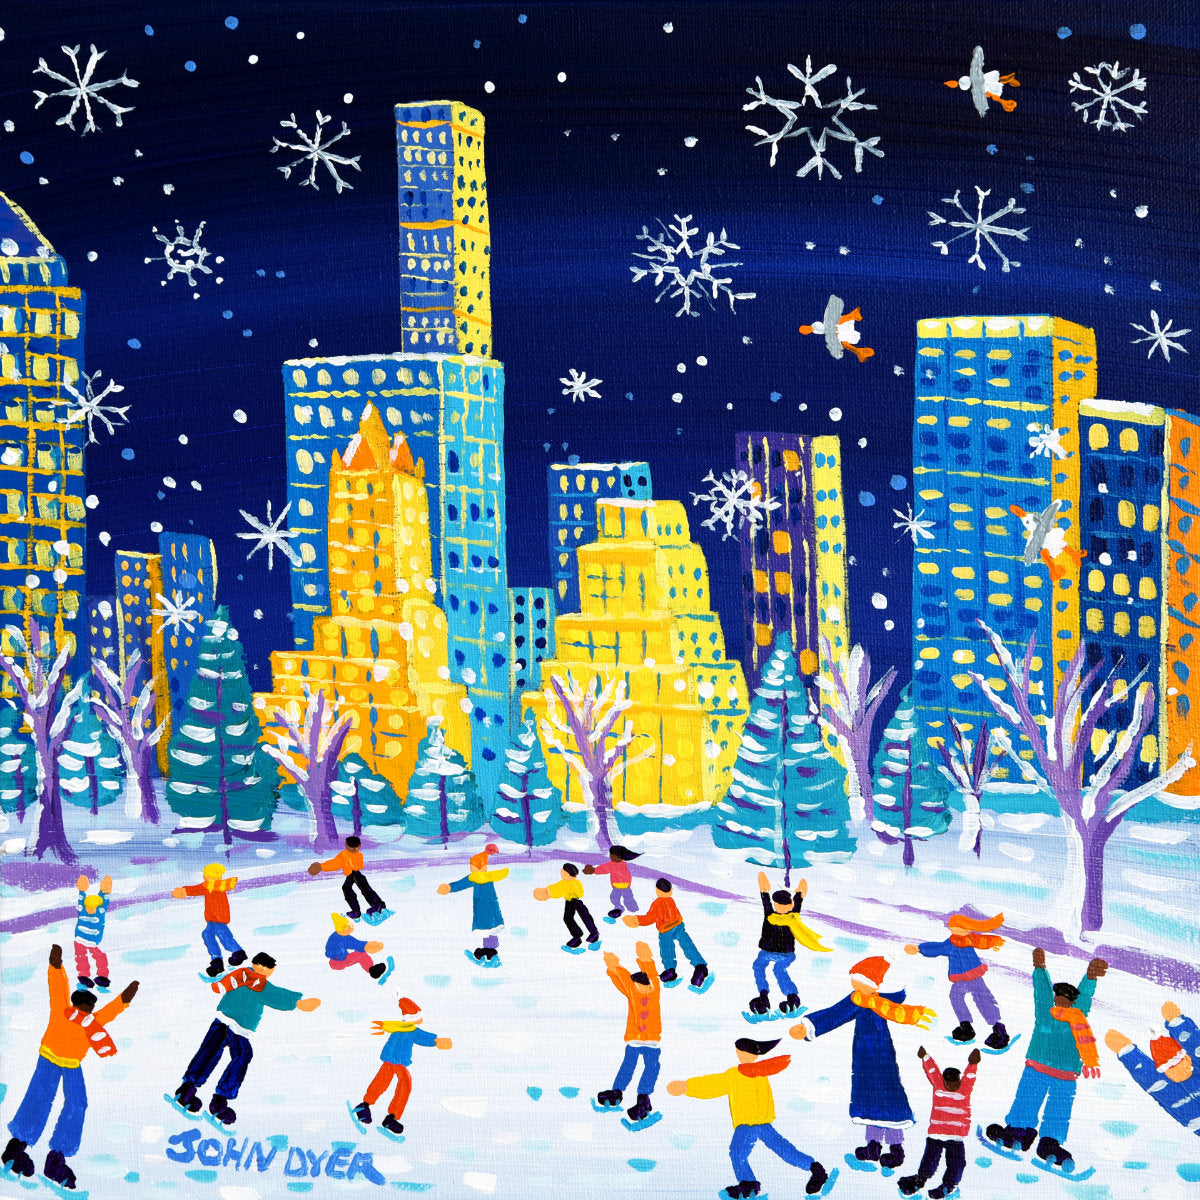 &#39;Winter Wonderland, Central Park, New York&#39;, 12x12 inches acrylic on canvas. Paintings of America by British Artist John Dyer. American Art Gallery. Ice Skating